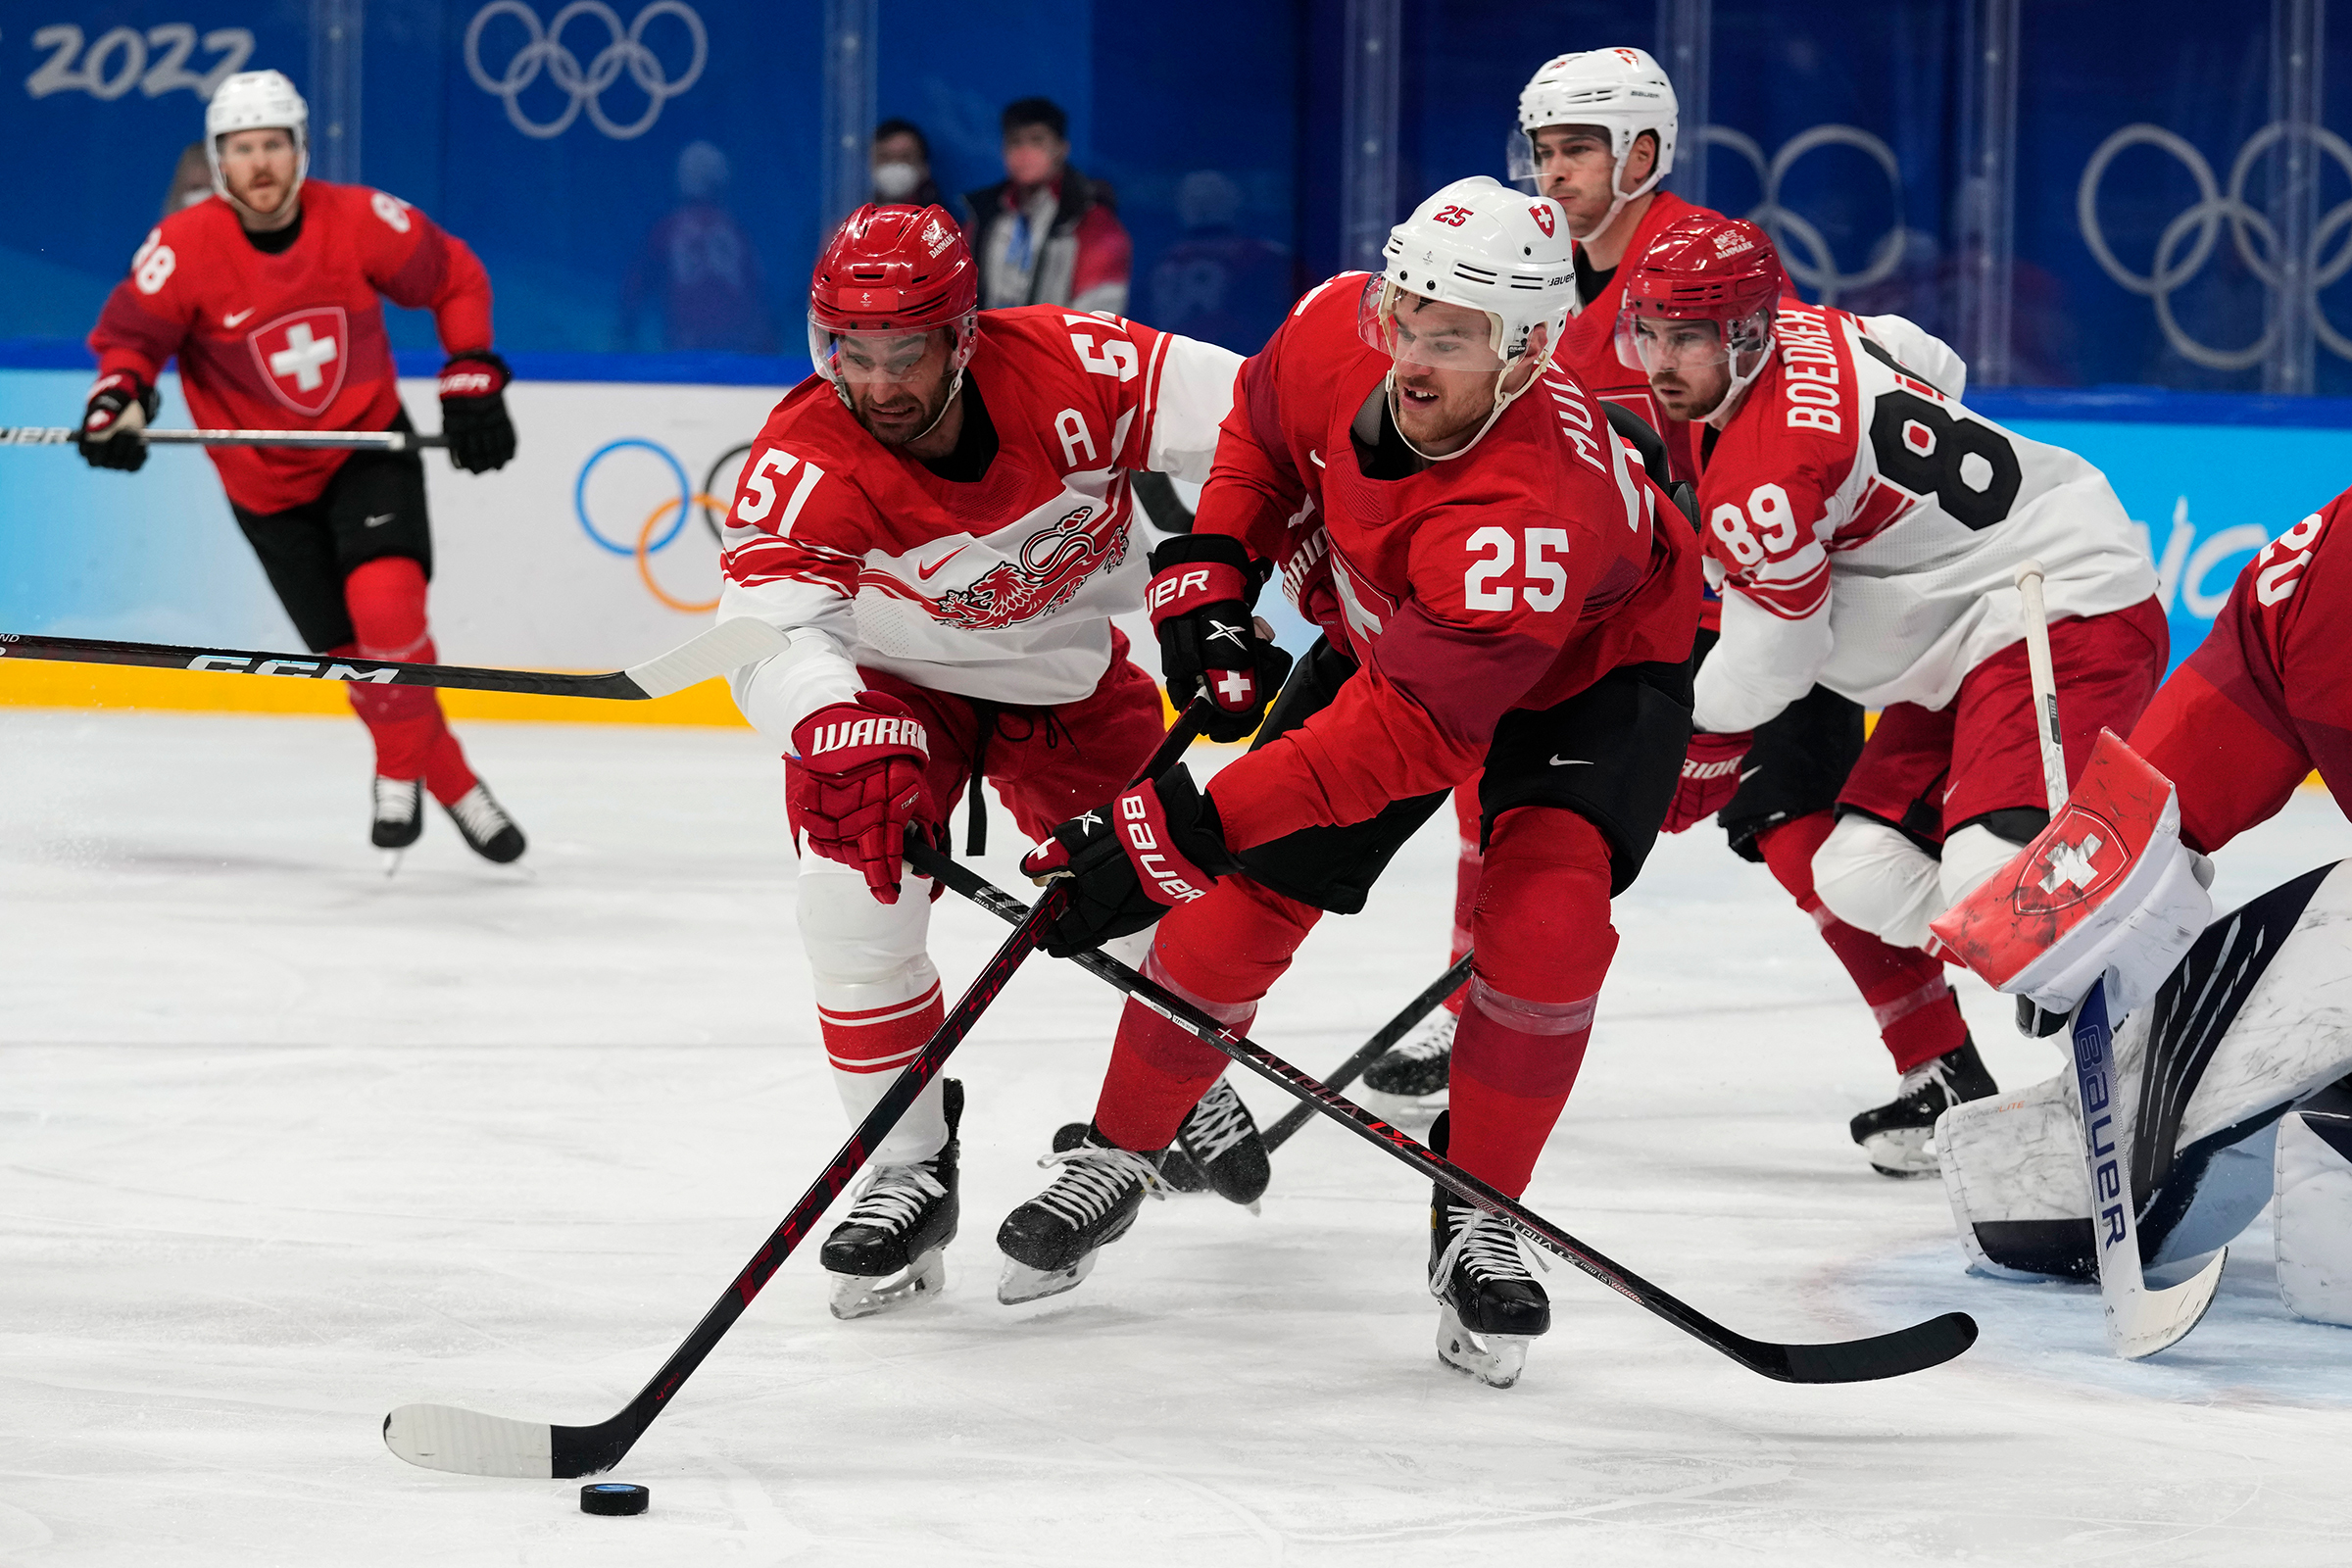 Switzerland's Mirco Muller skates with the "biscuit" away from Denmark's Frans Nielsen during a preliminary round men's hockey game on Saturday, February 12.